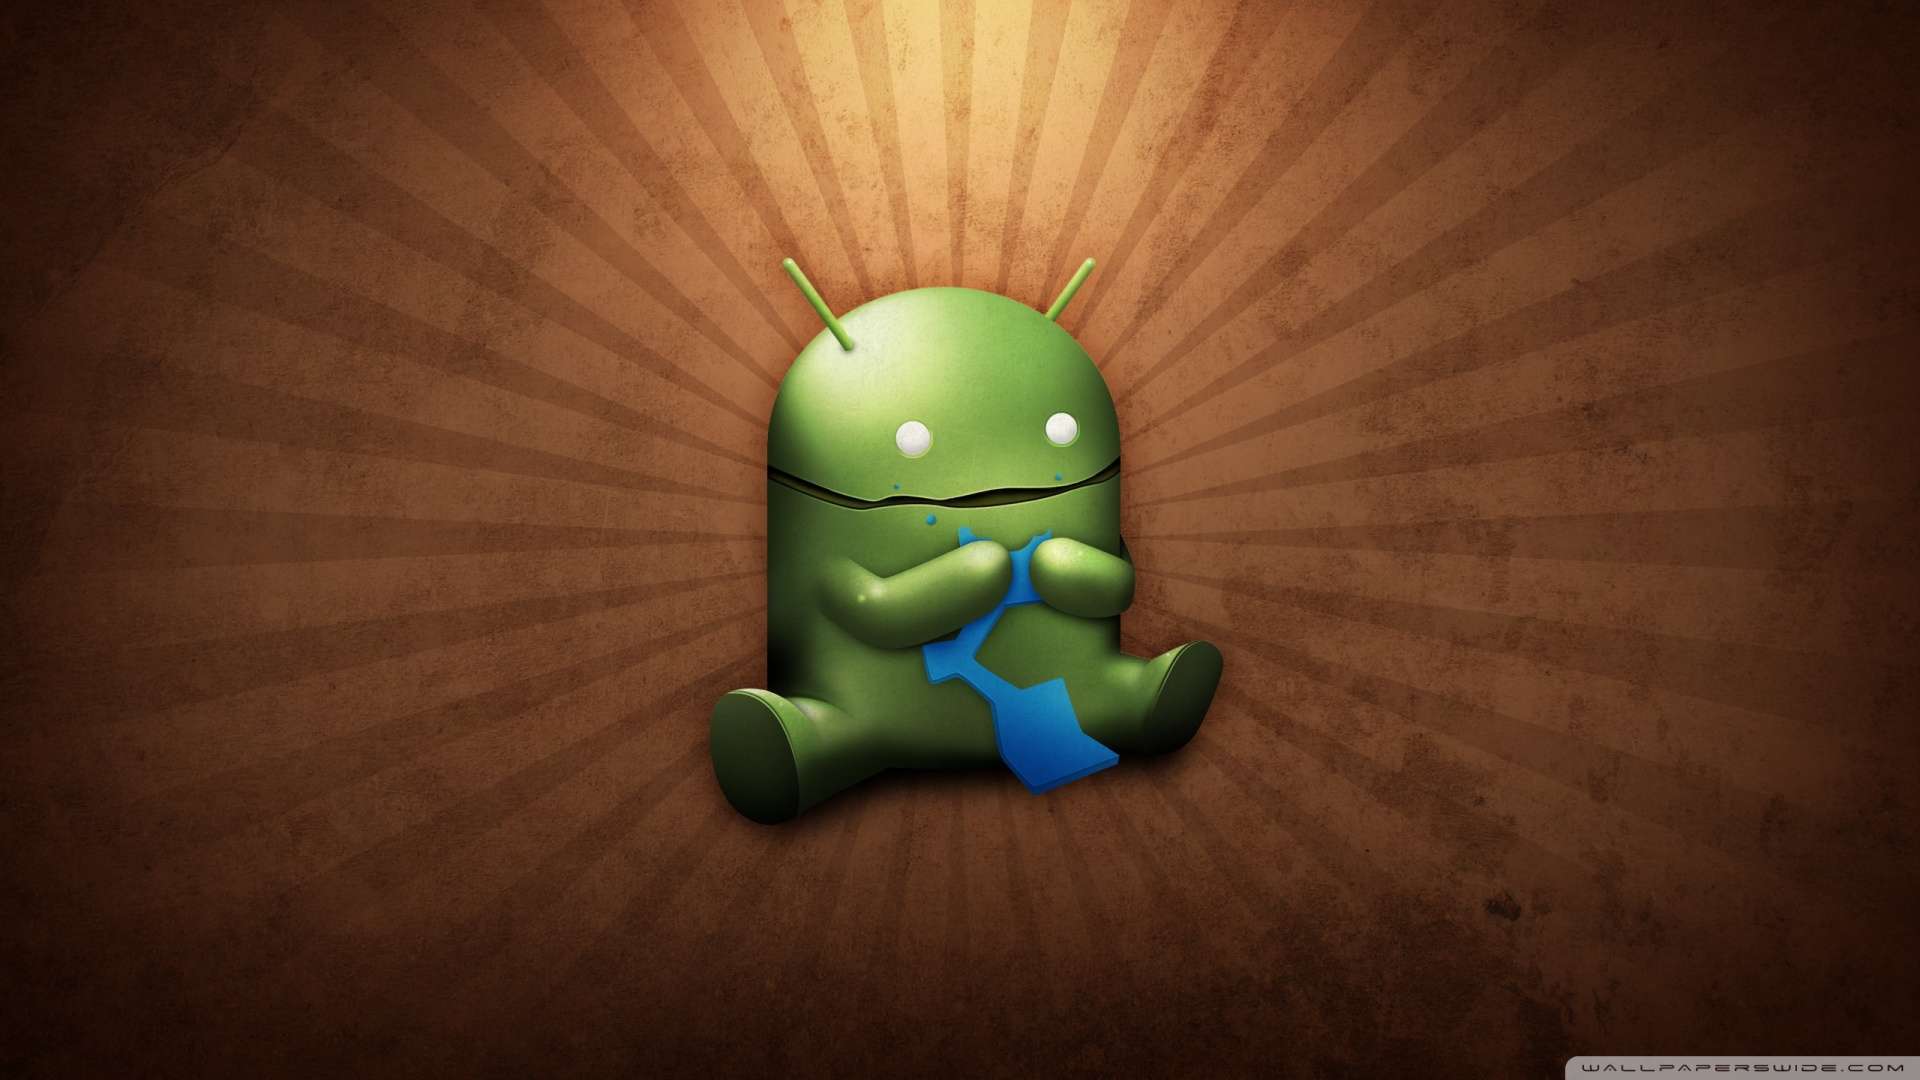 Wallpaper Funny Android Robot 1080p HD Upload At January